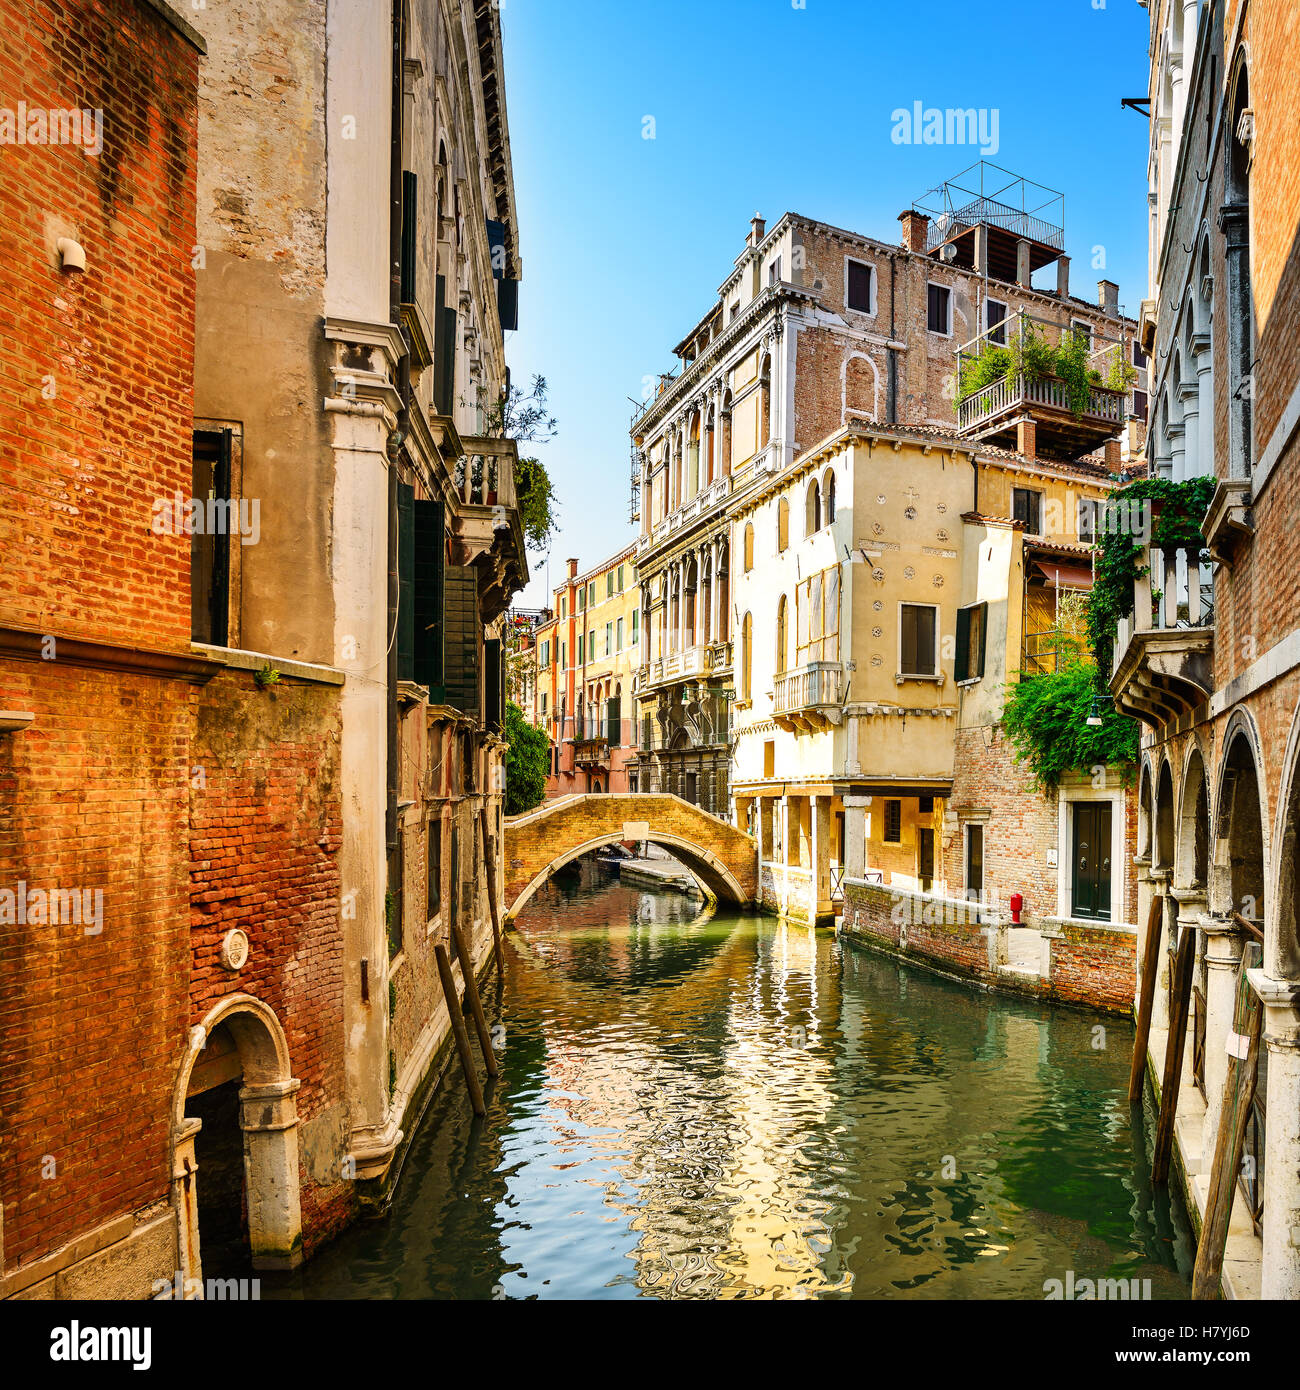 Venice sunset cityscape, water canal, bridge and traditional buildings. Italy, Europe. Stock Photo